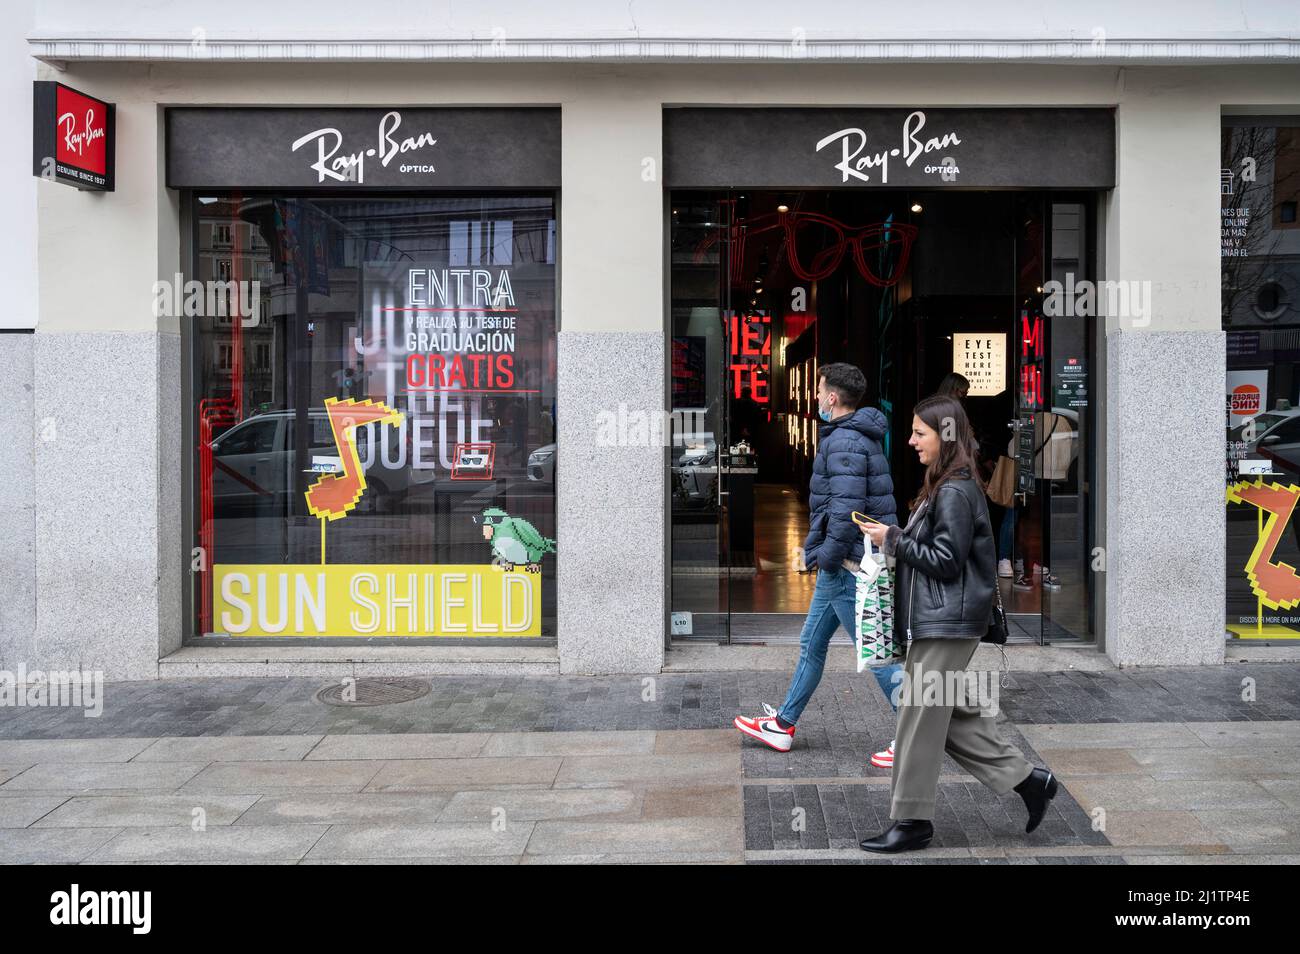 Pedestrians walk past the American sunglasses and eyeglasses brand Ray-Ban  store in Spain Stock Photo - Alamy